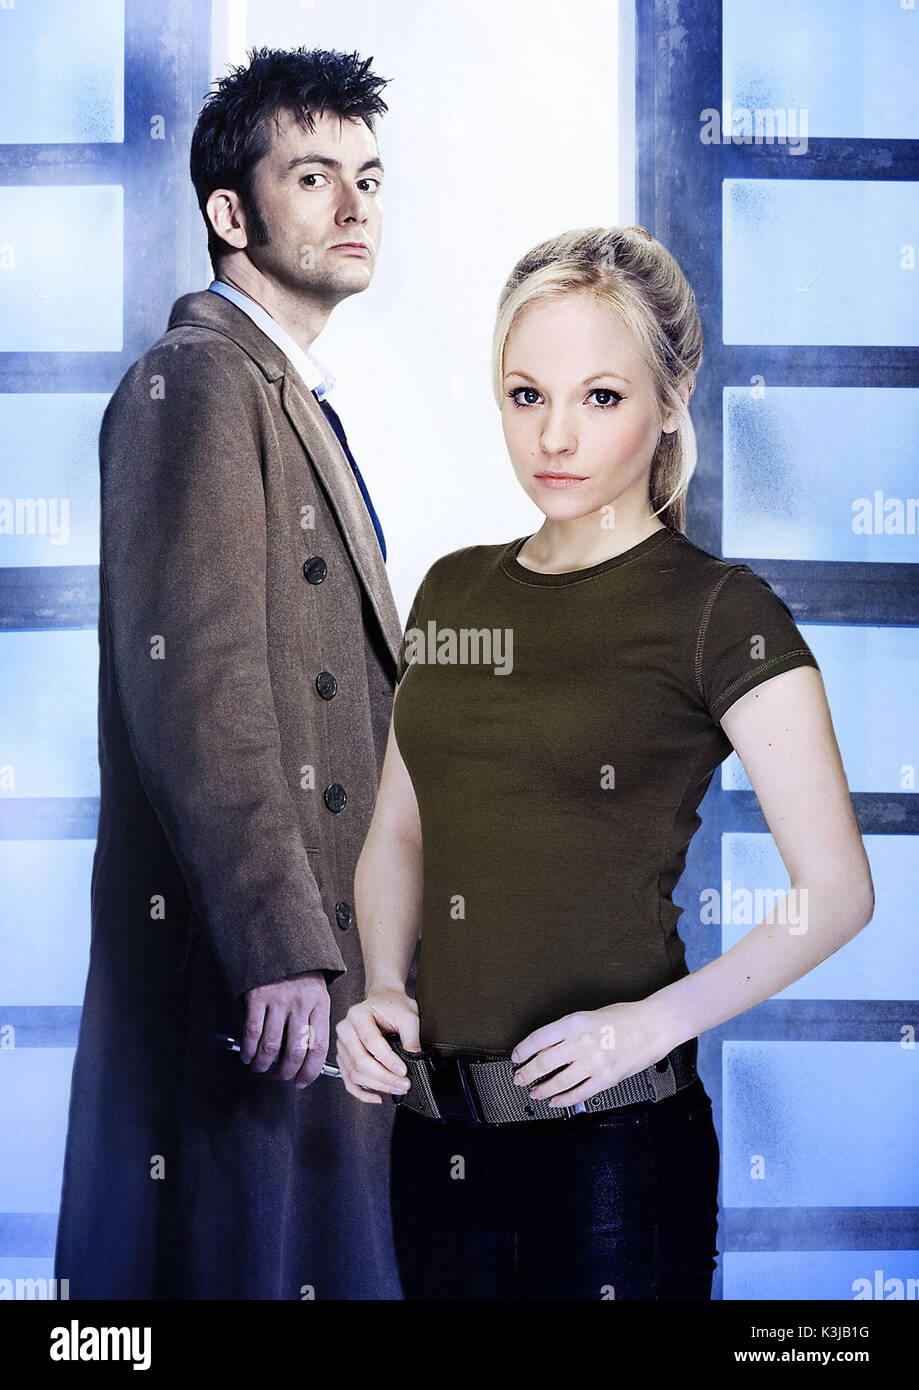 DOCTOR WHO DAVID TENNANT as the Doctor, GEORGIA MOFFETT as Jenny DOCTOR WHO  Date: 2007 Stock Photo - Alamy